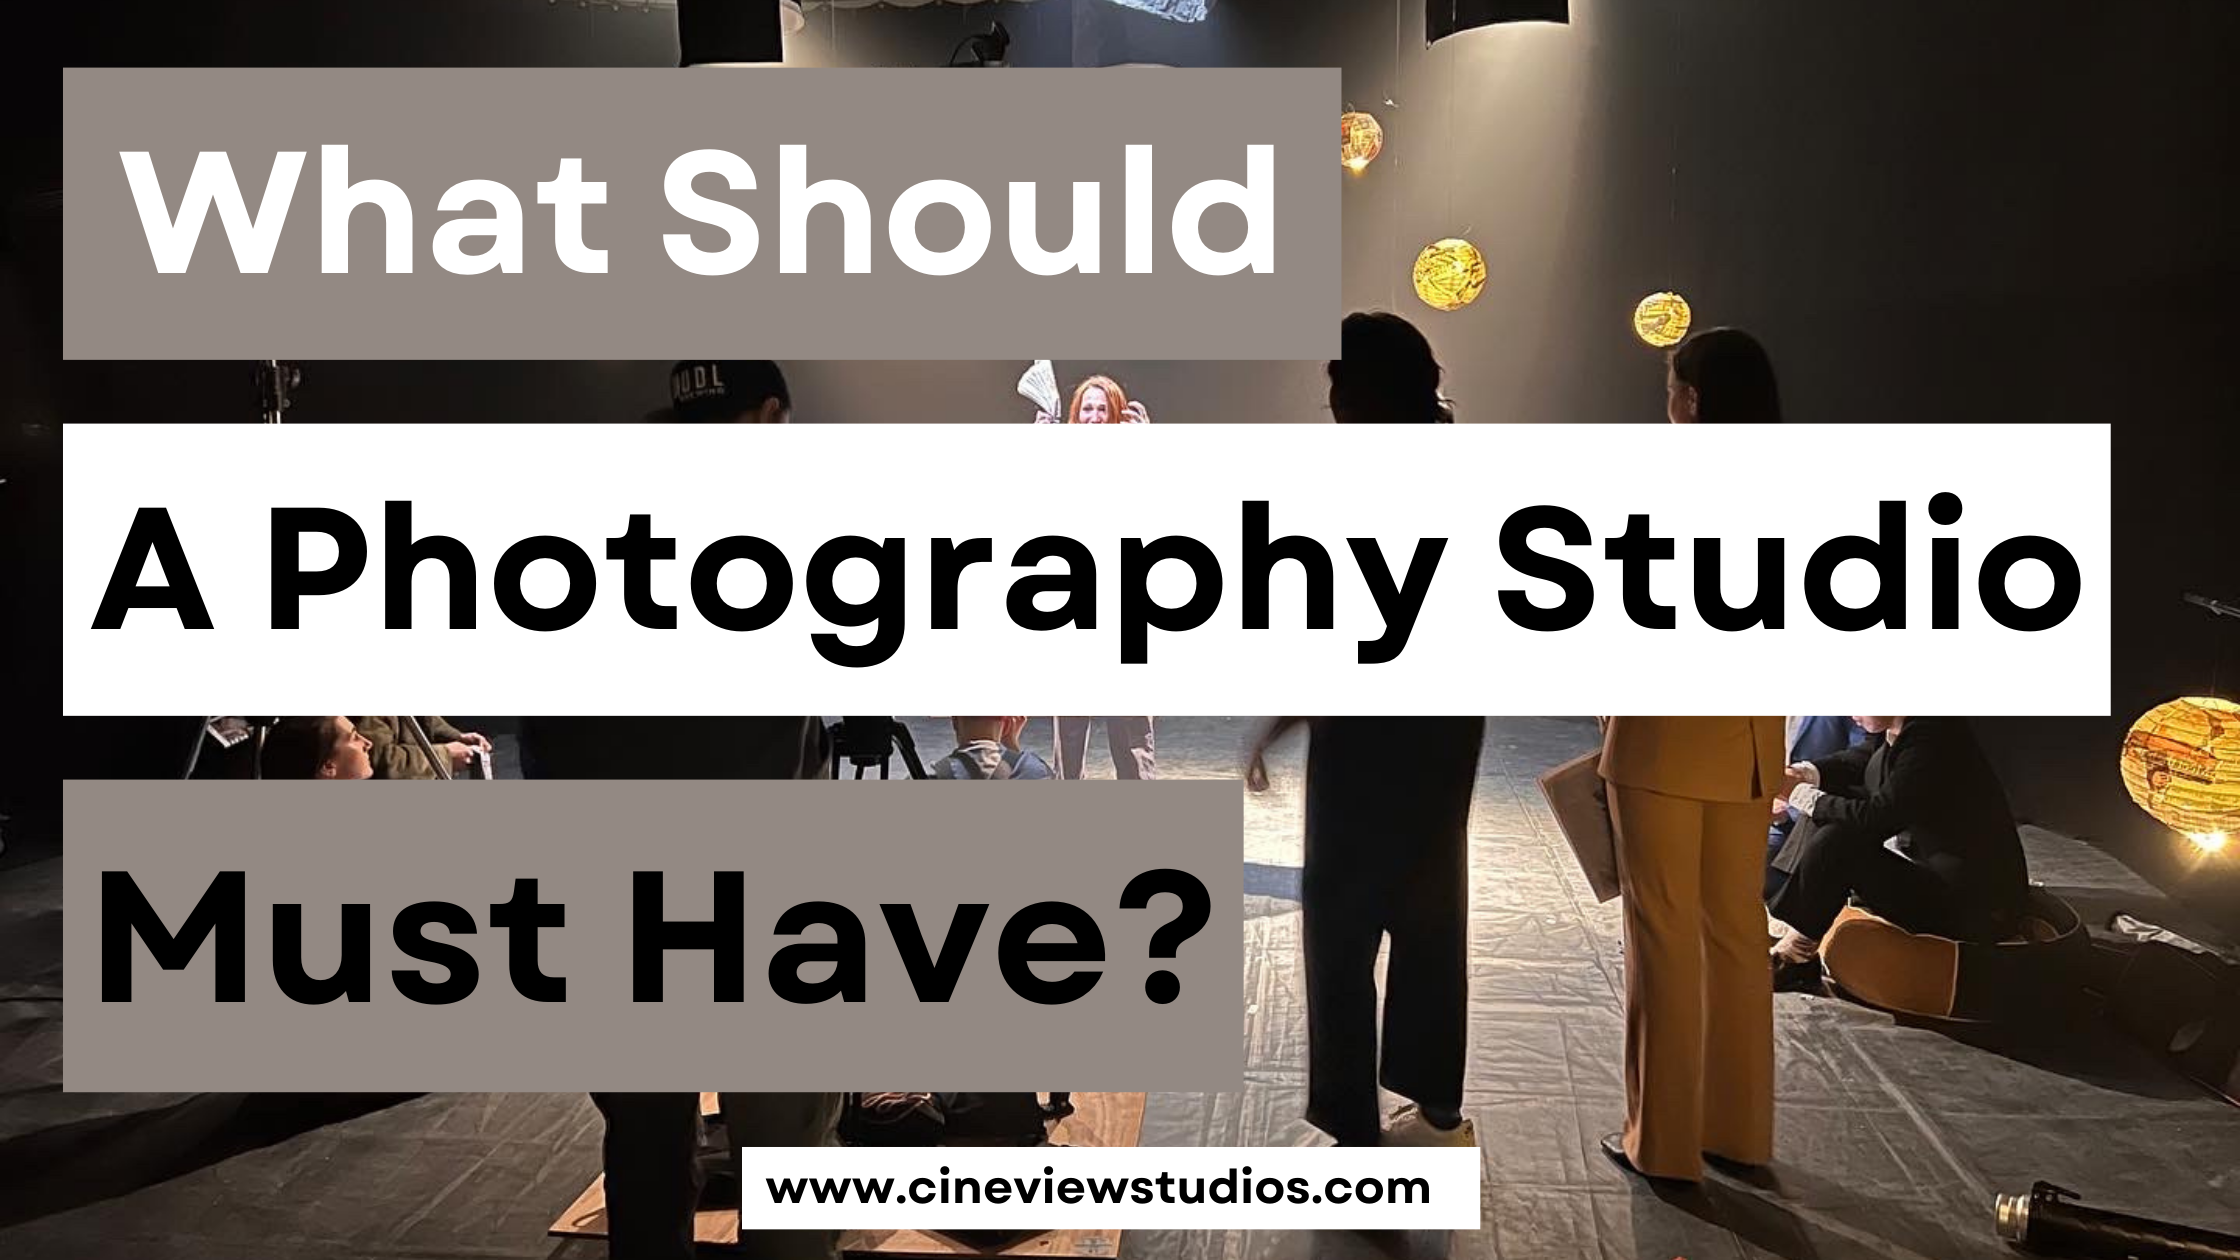 What Should a Photography Studio Have - 5 Essential Features Every